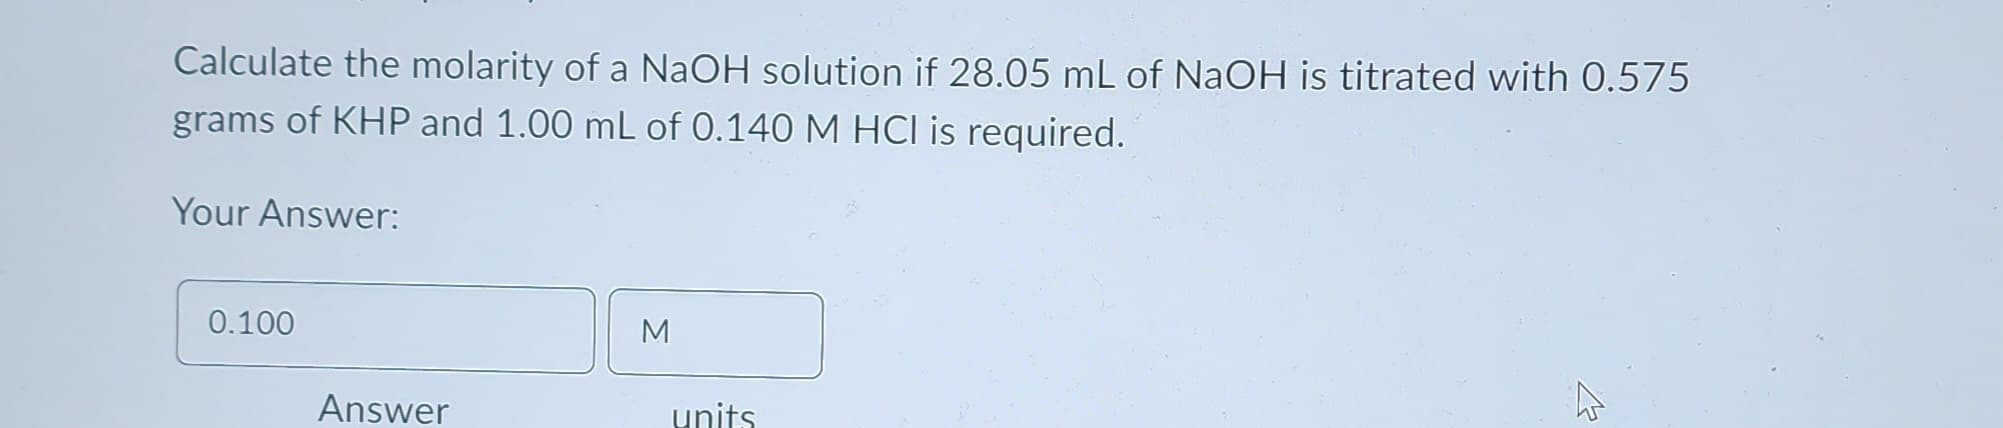 Calculate the molarity of a NaOH solution if 28.05 mL of NaOH is titrated with 0.575
grams of KHP and 1.00 mL of 0.140 M HCl is required.
Your Answer:
0.100
Answer
M
units